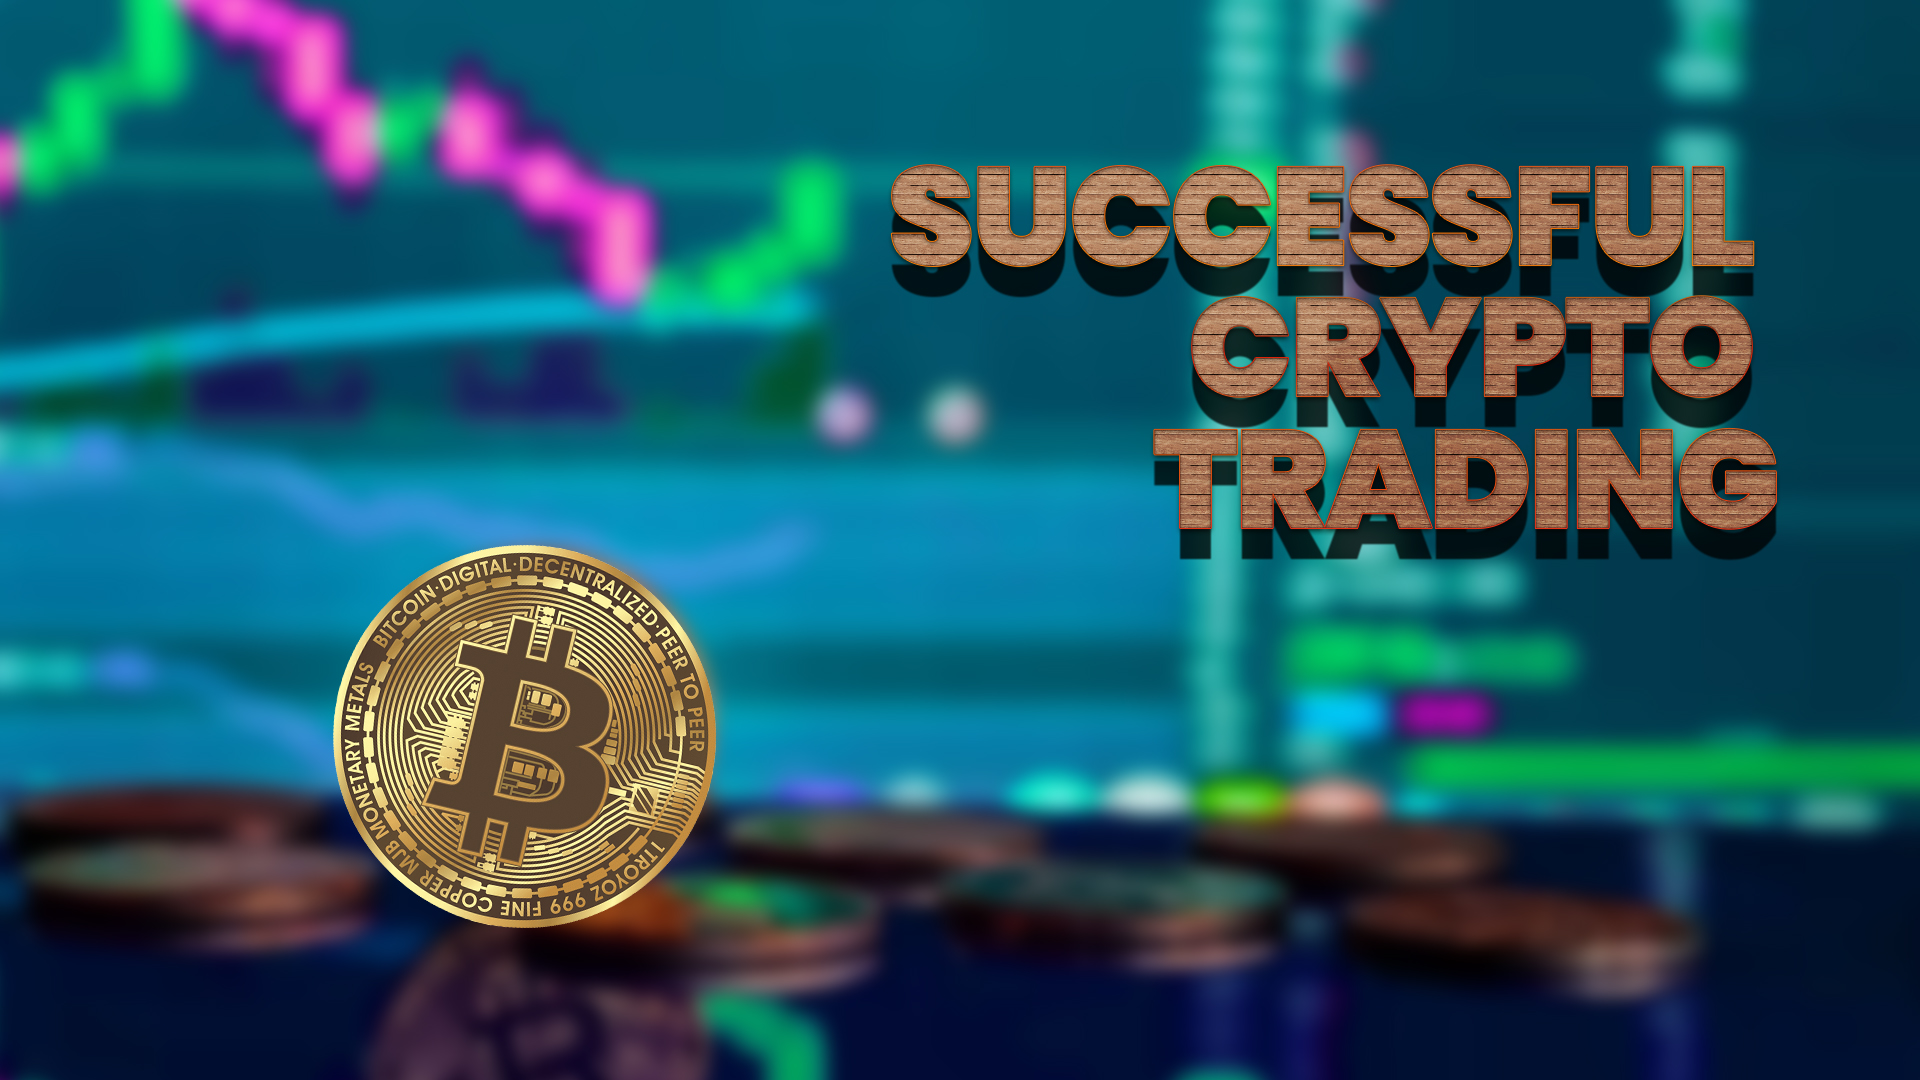 7 Pro tips for successful crypto trading